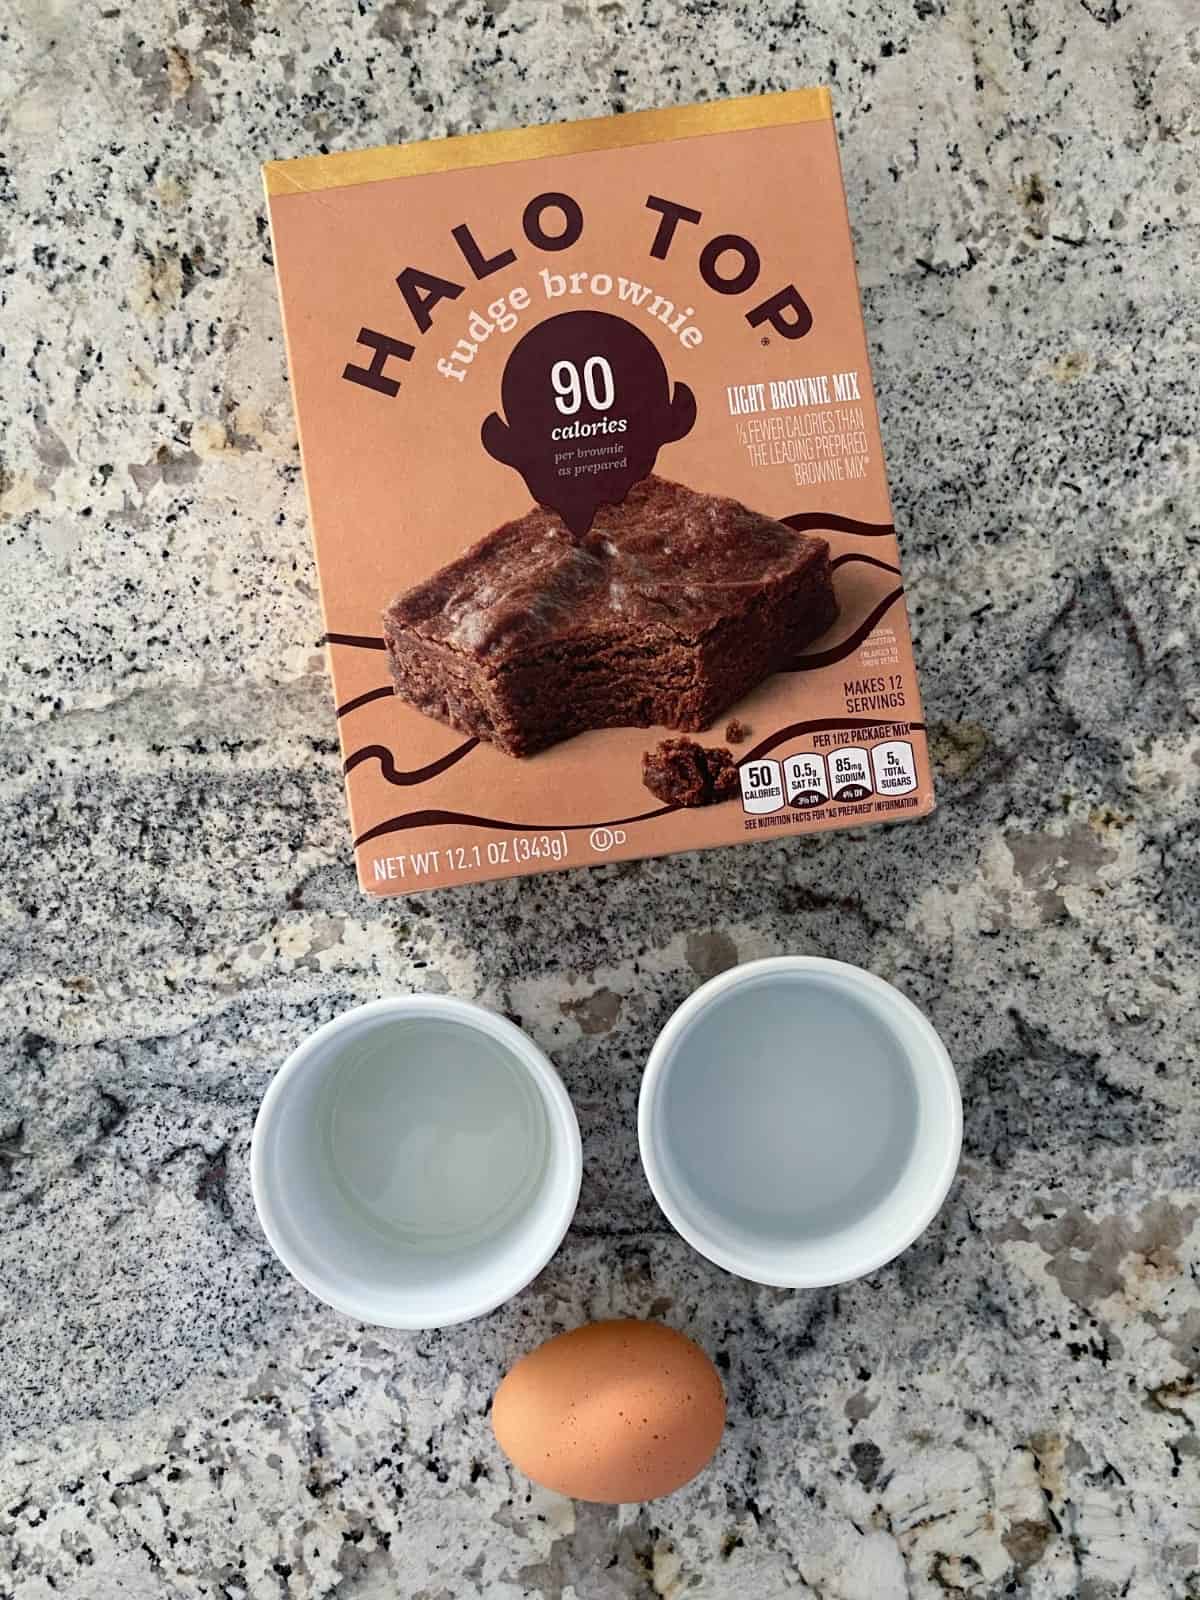 Box of Halo Top fudge brownie mix, two small white ramekins with water and canola oil and one egg on granite.